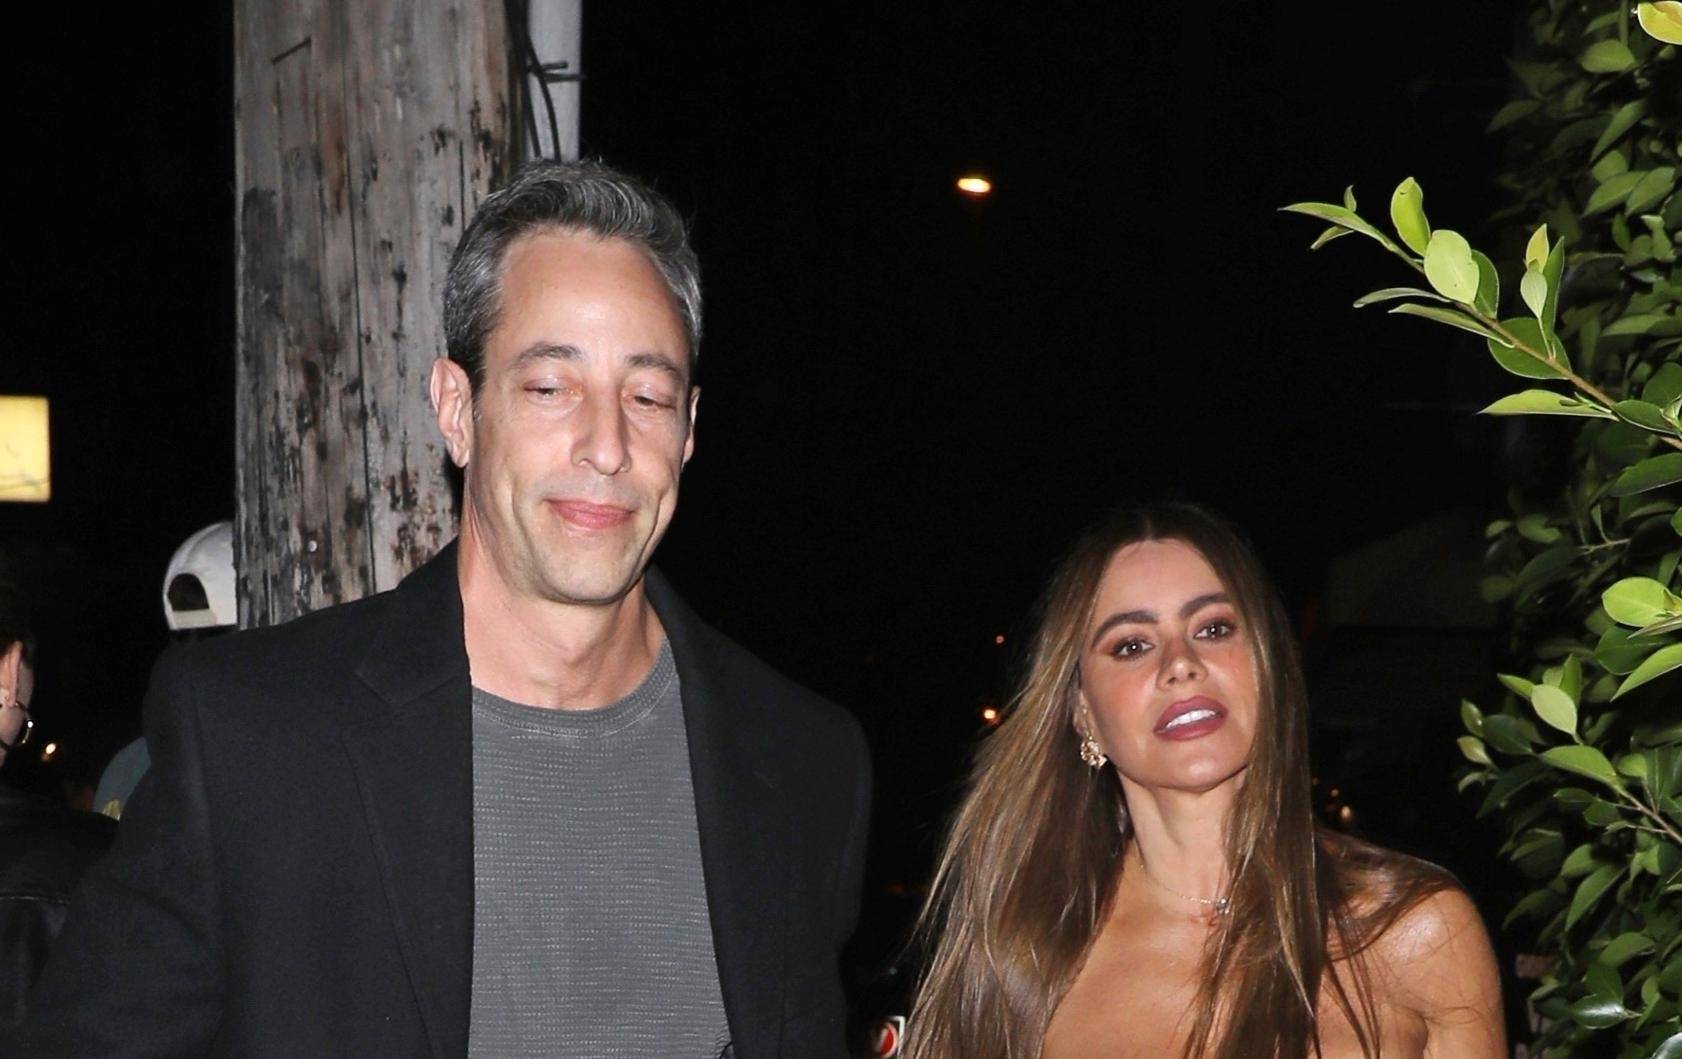 *EXCLUSIVE* Sofia Vergara and new boyfriend Justin Saliman head out for a romantic dinner date in Santa Monica!